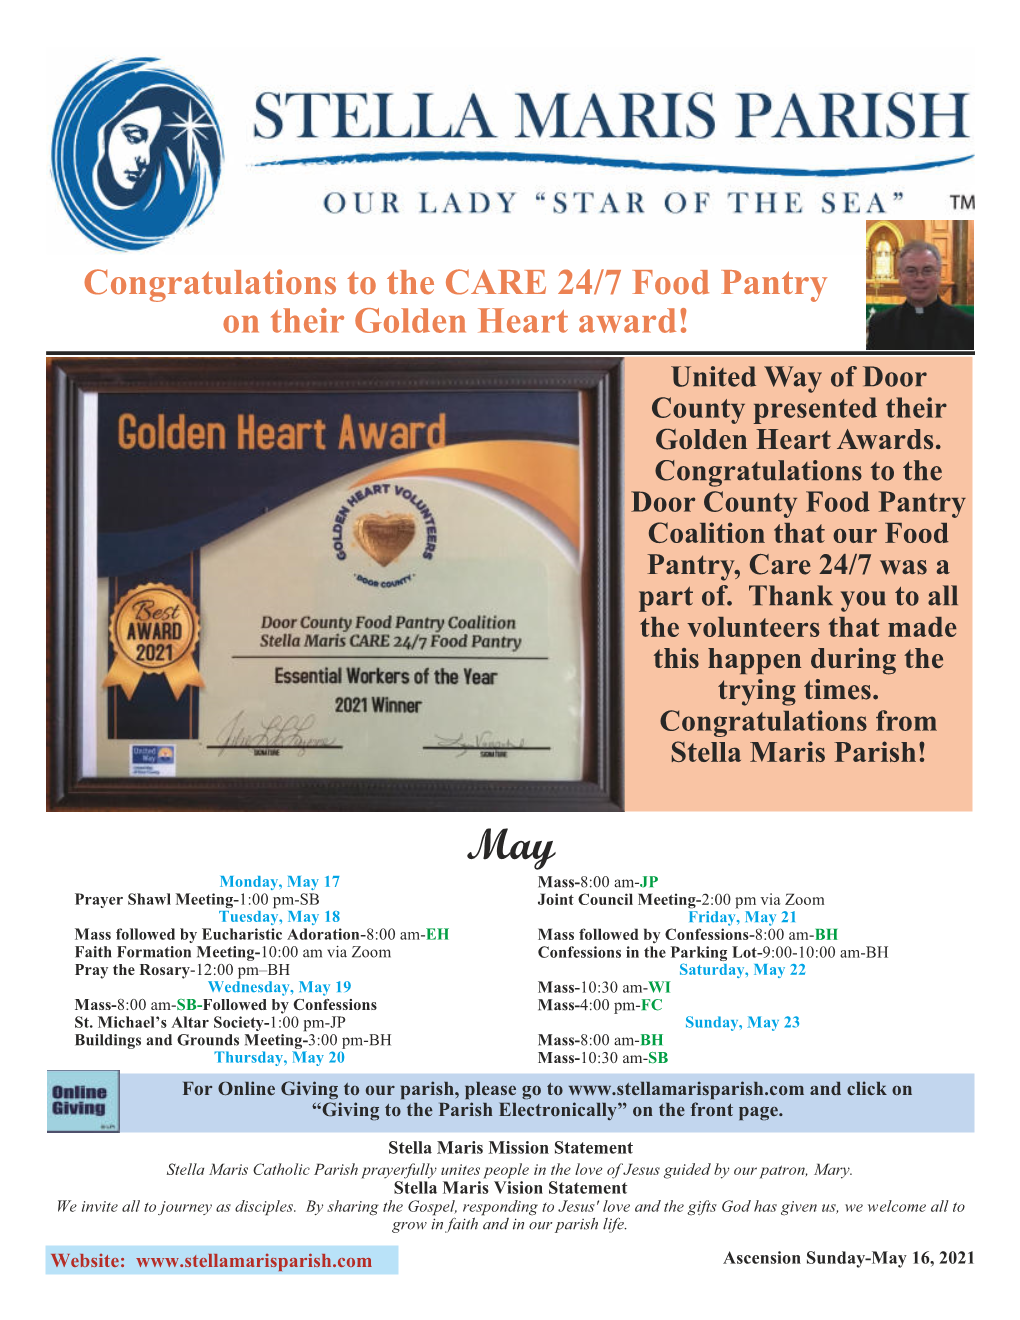 Congratulations to the CARE 24/7 Food Pantry on Their Golden Heart Award! United Way of Door County Presented Their Golden Heart Awards